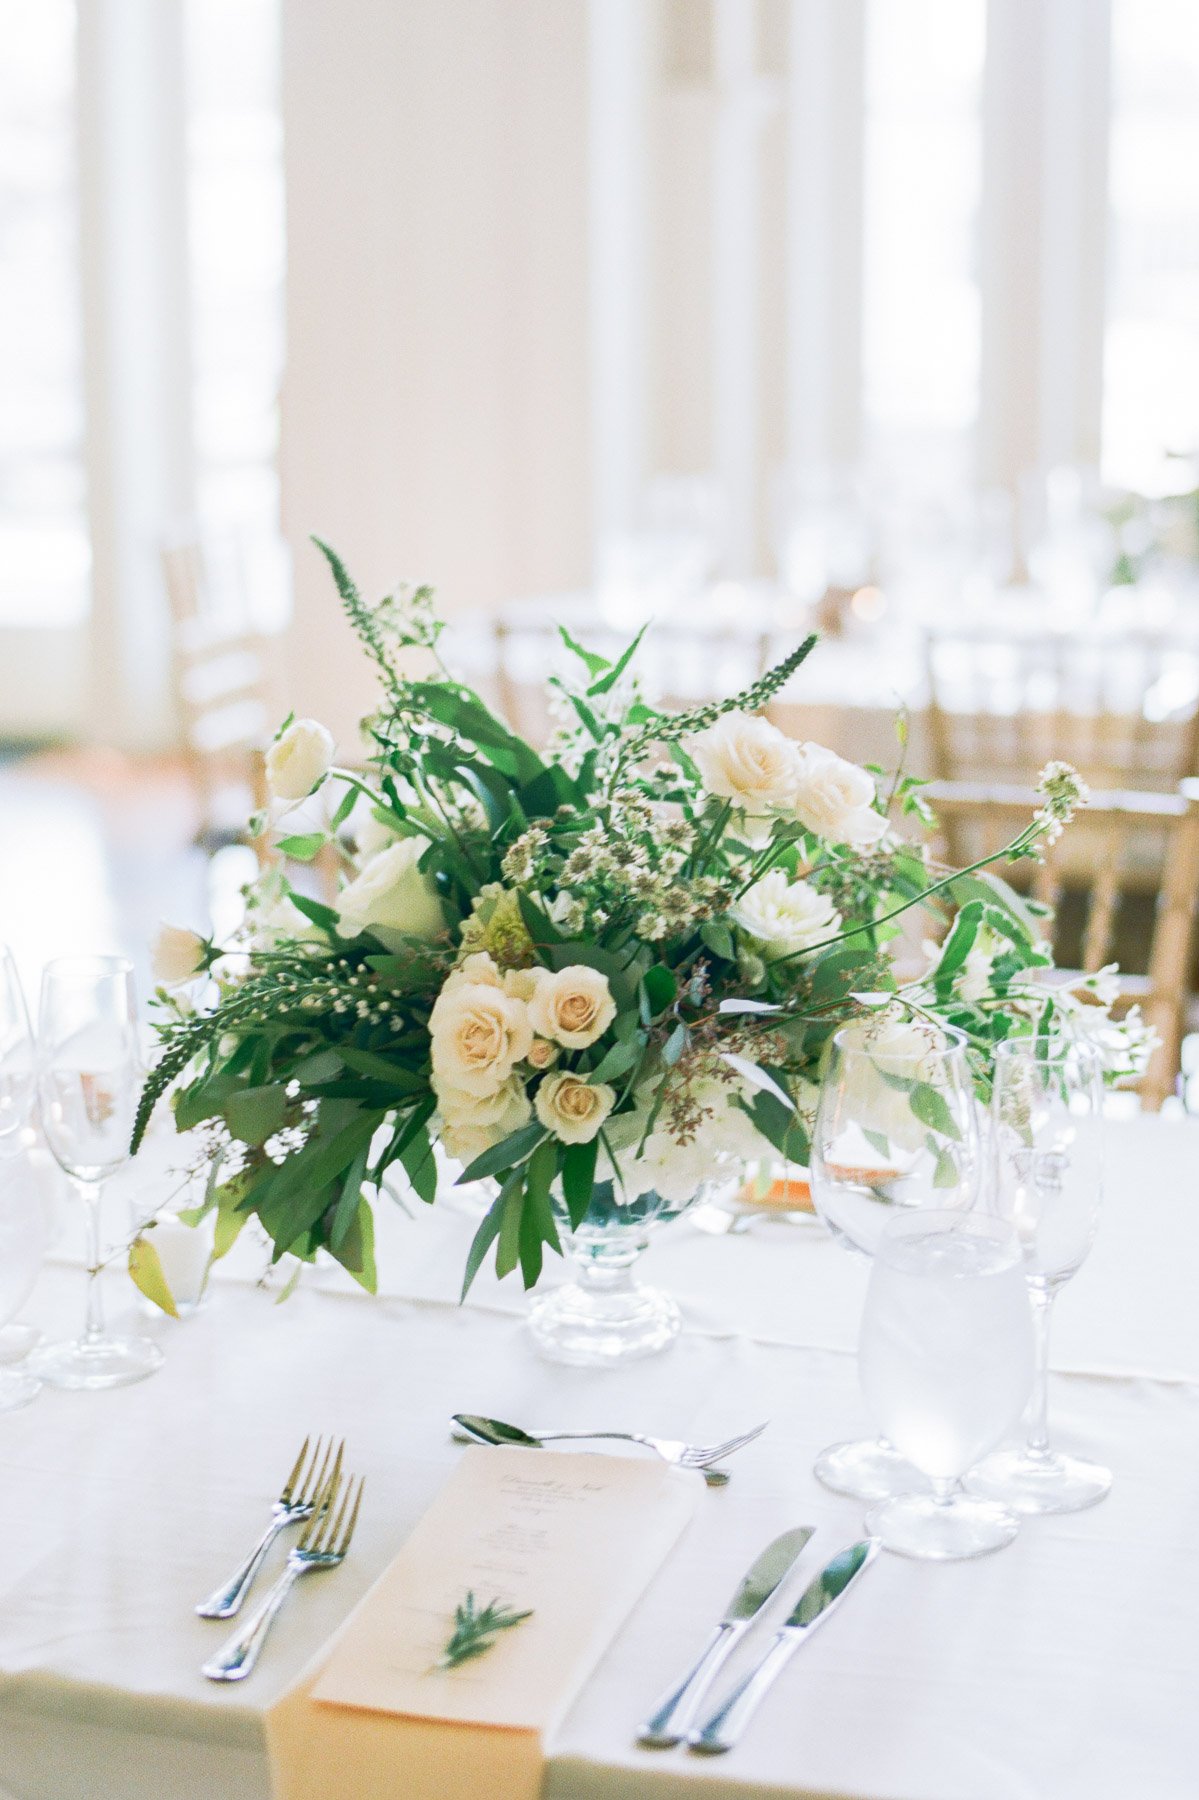 Green and white wedding centerpieces